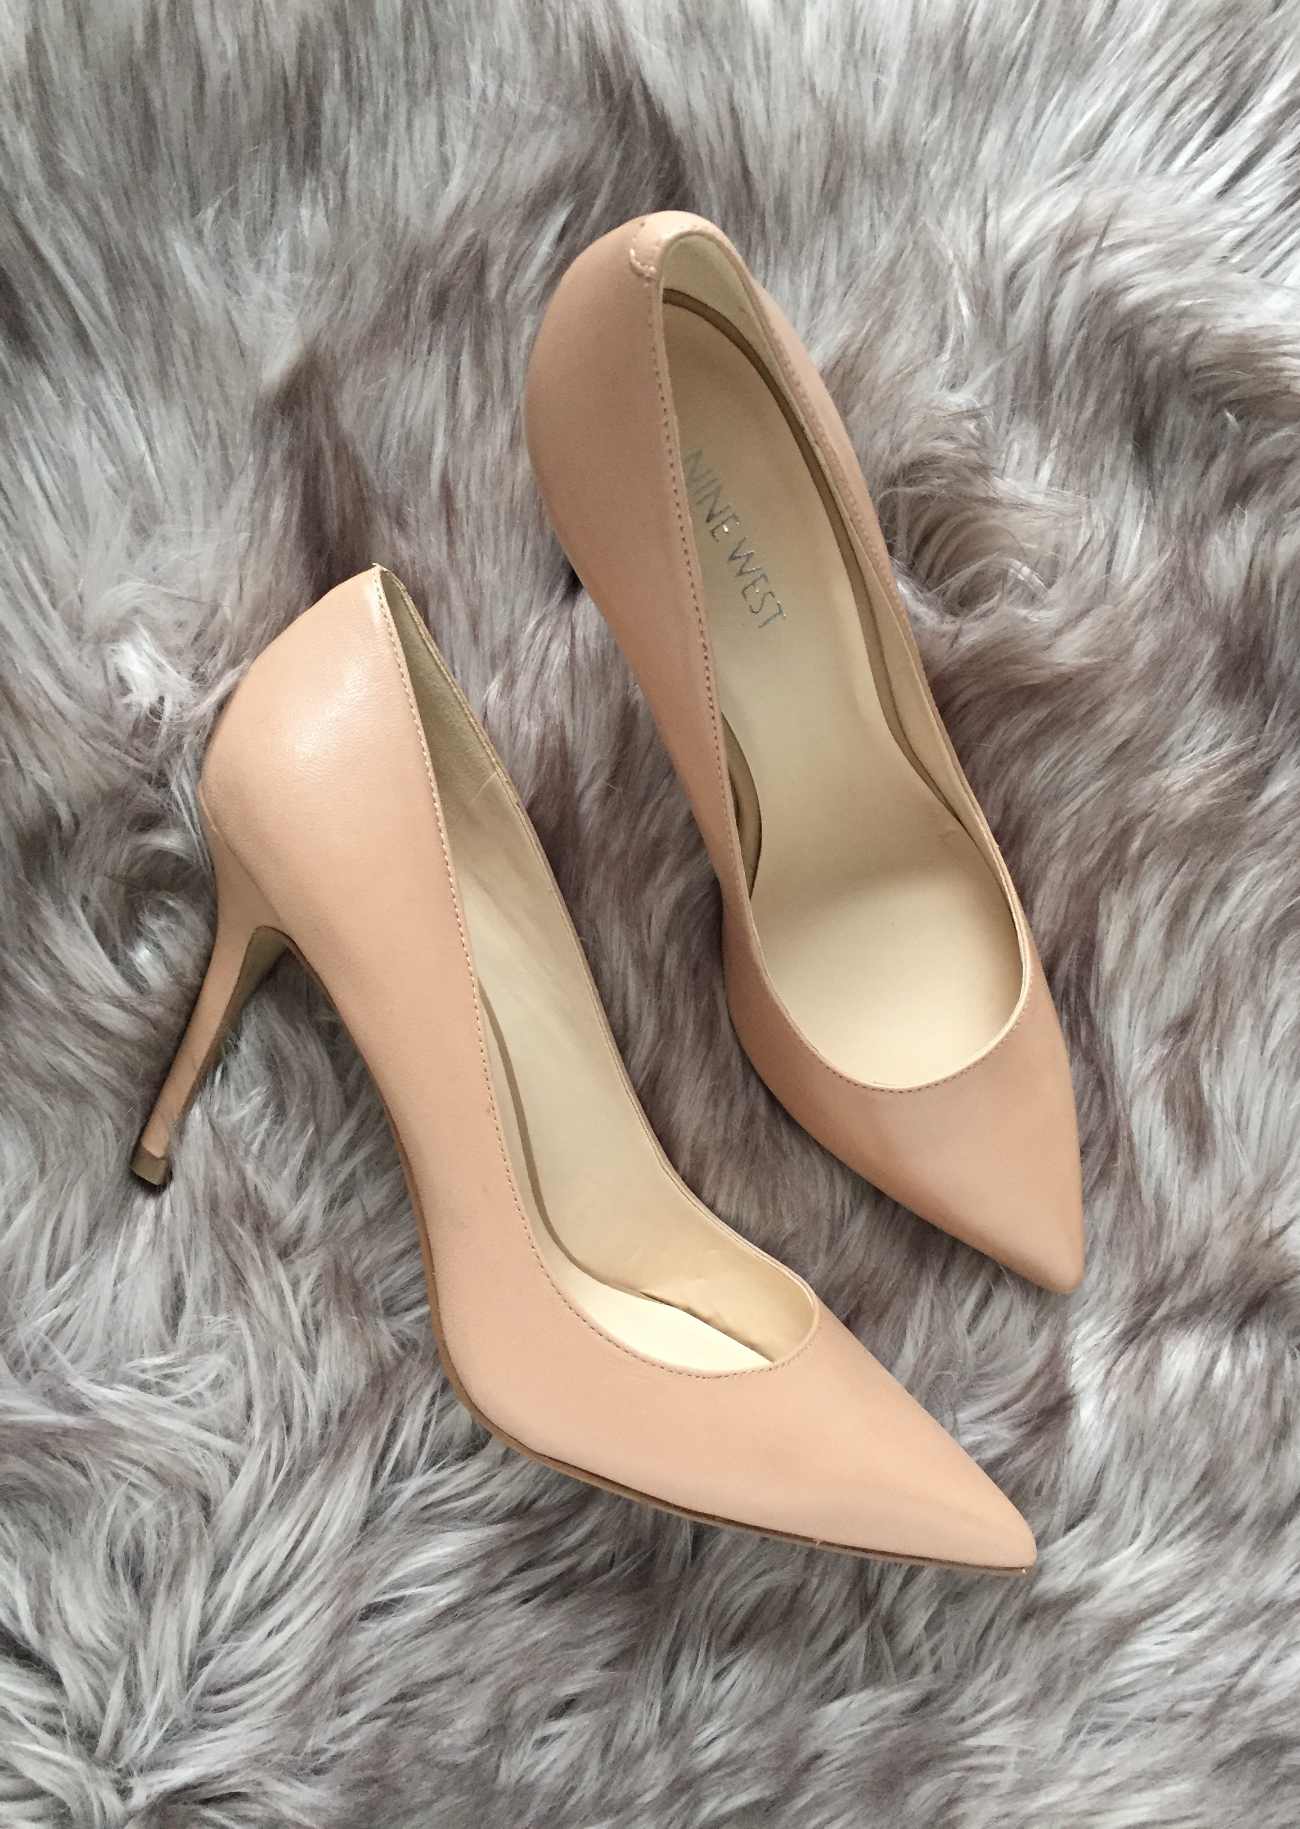 Blush Pumps Shoes that go with everything, laying on a taupe carpet.